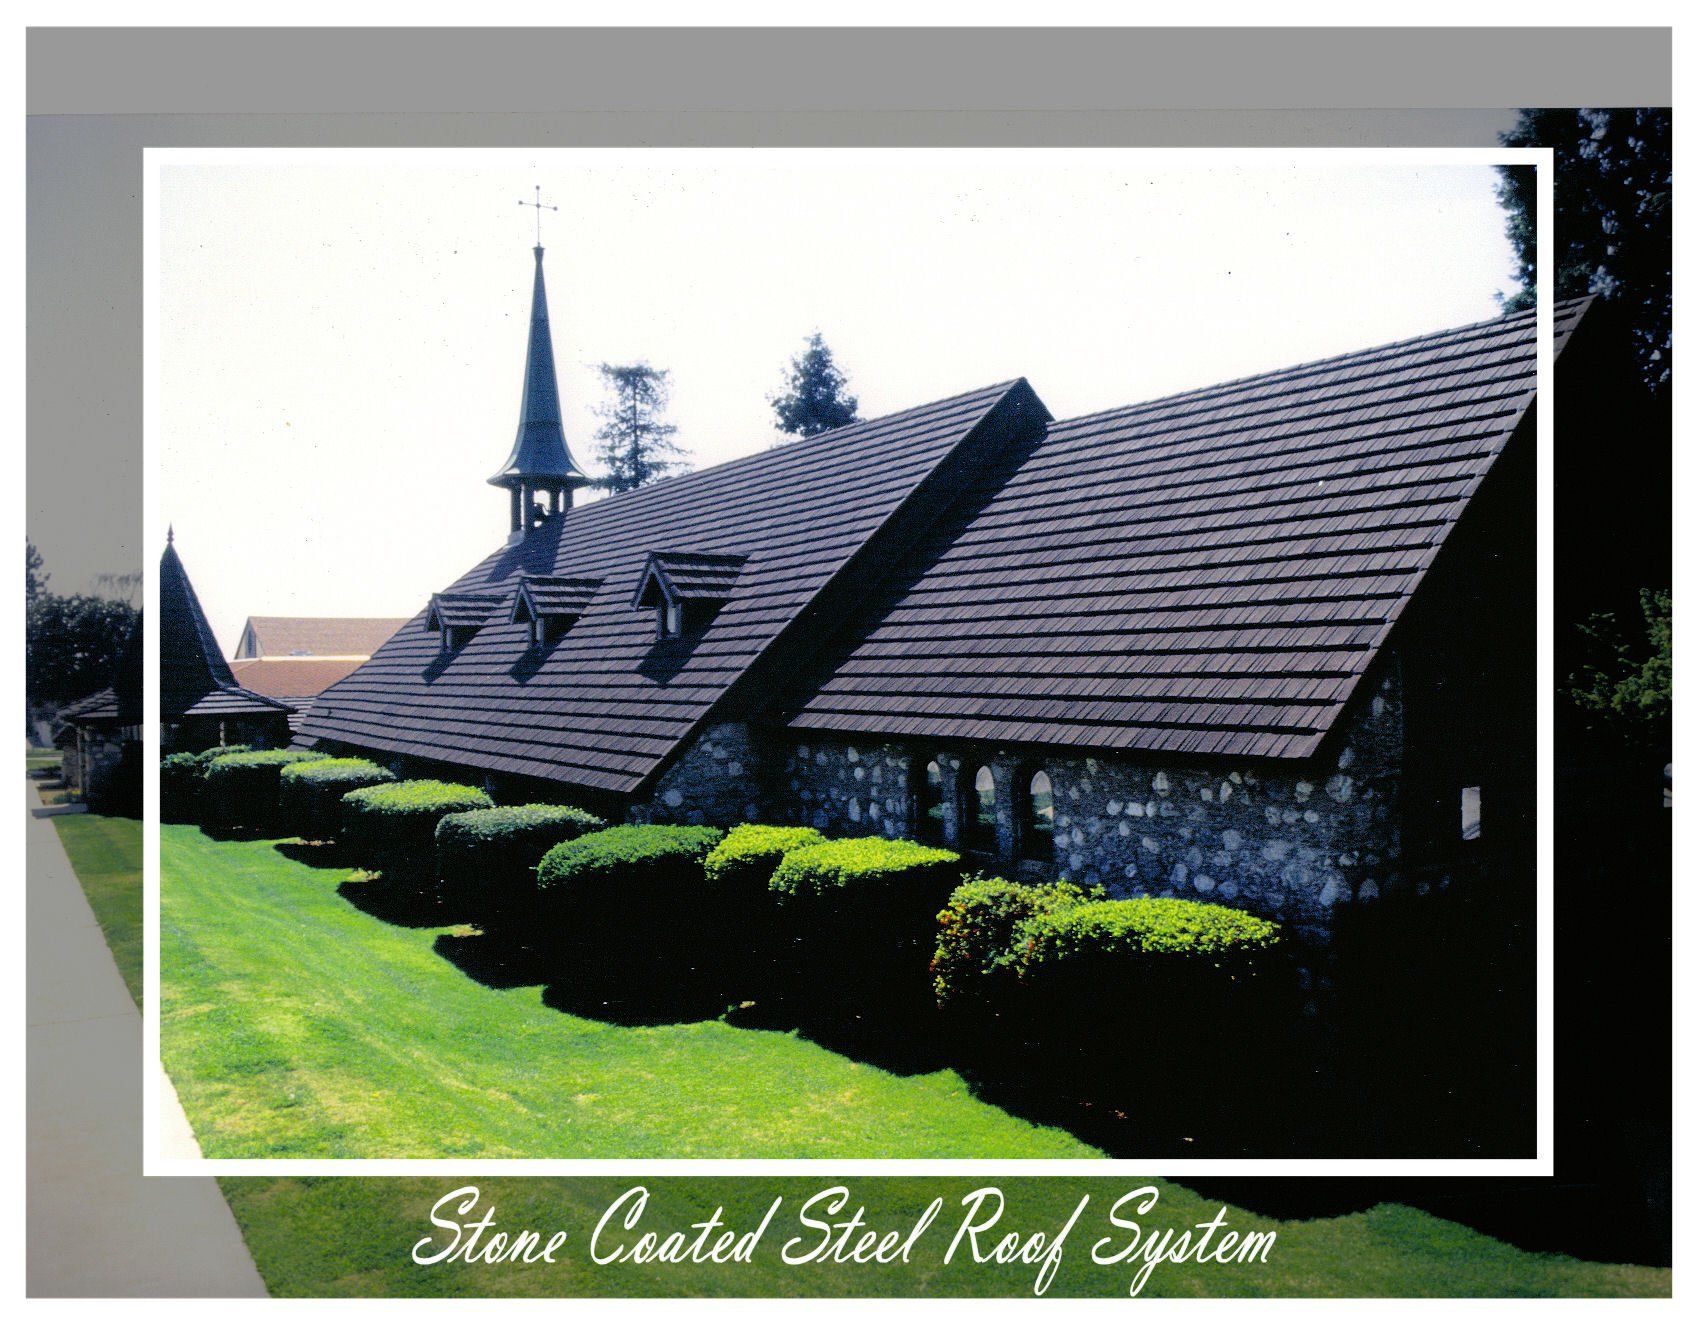 Stone Coated Steel Roof System in Camarillo, CA